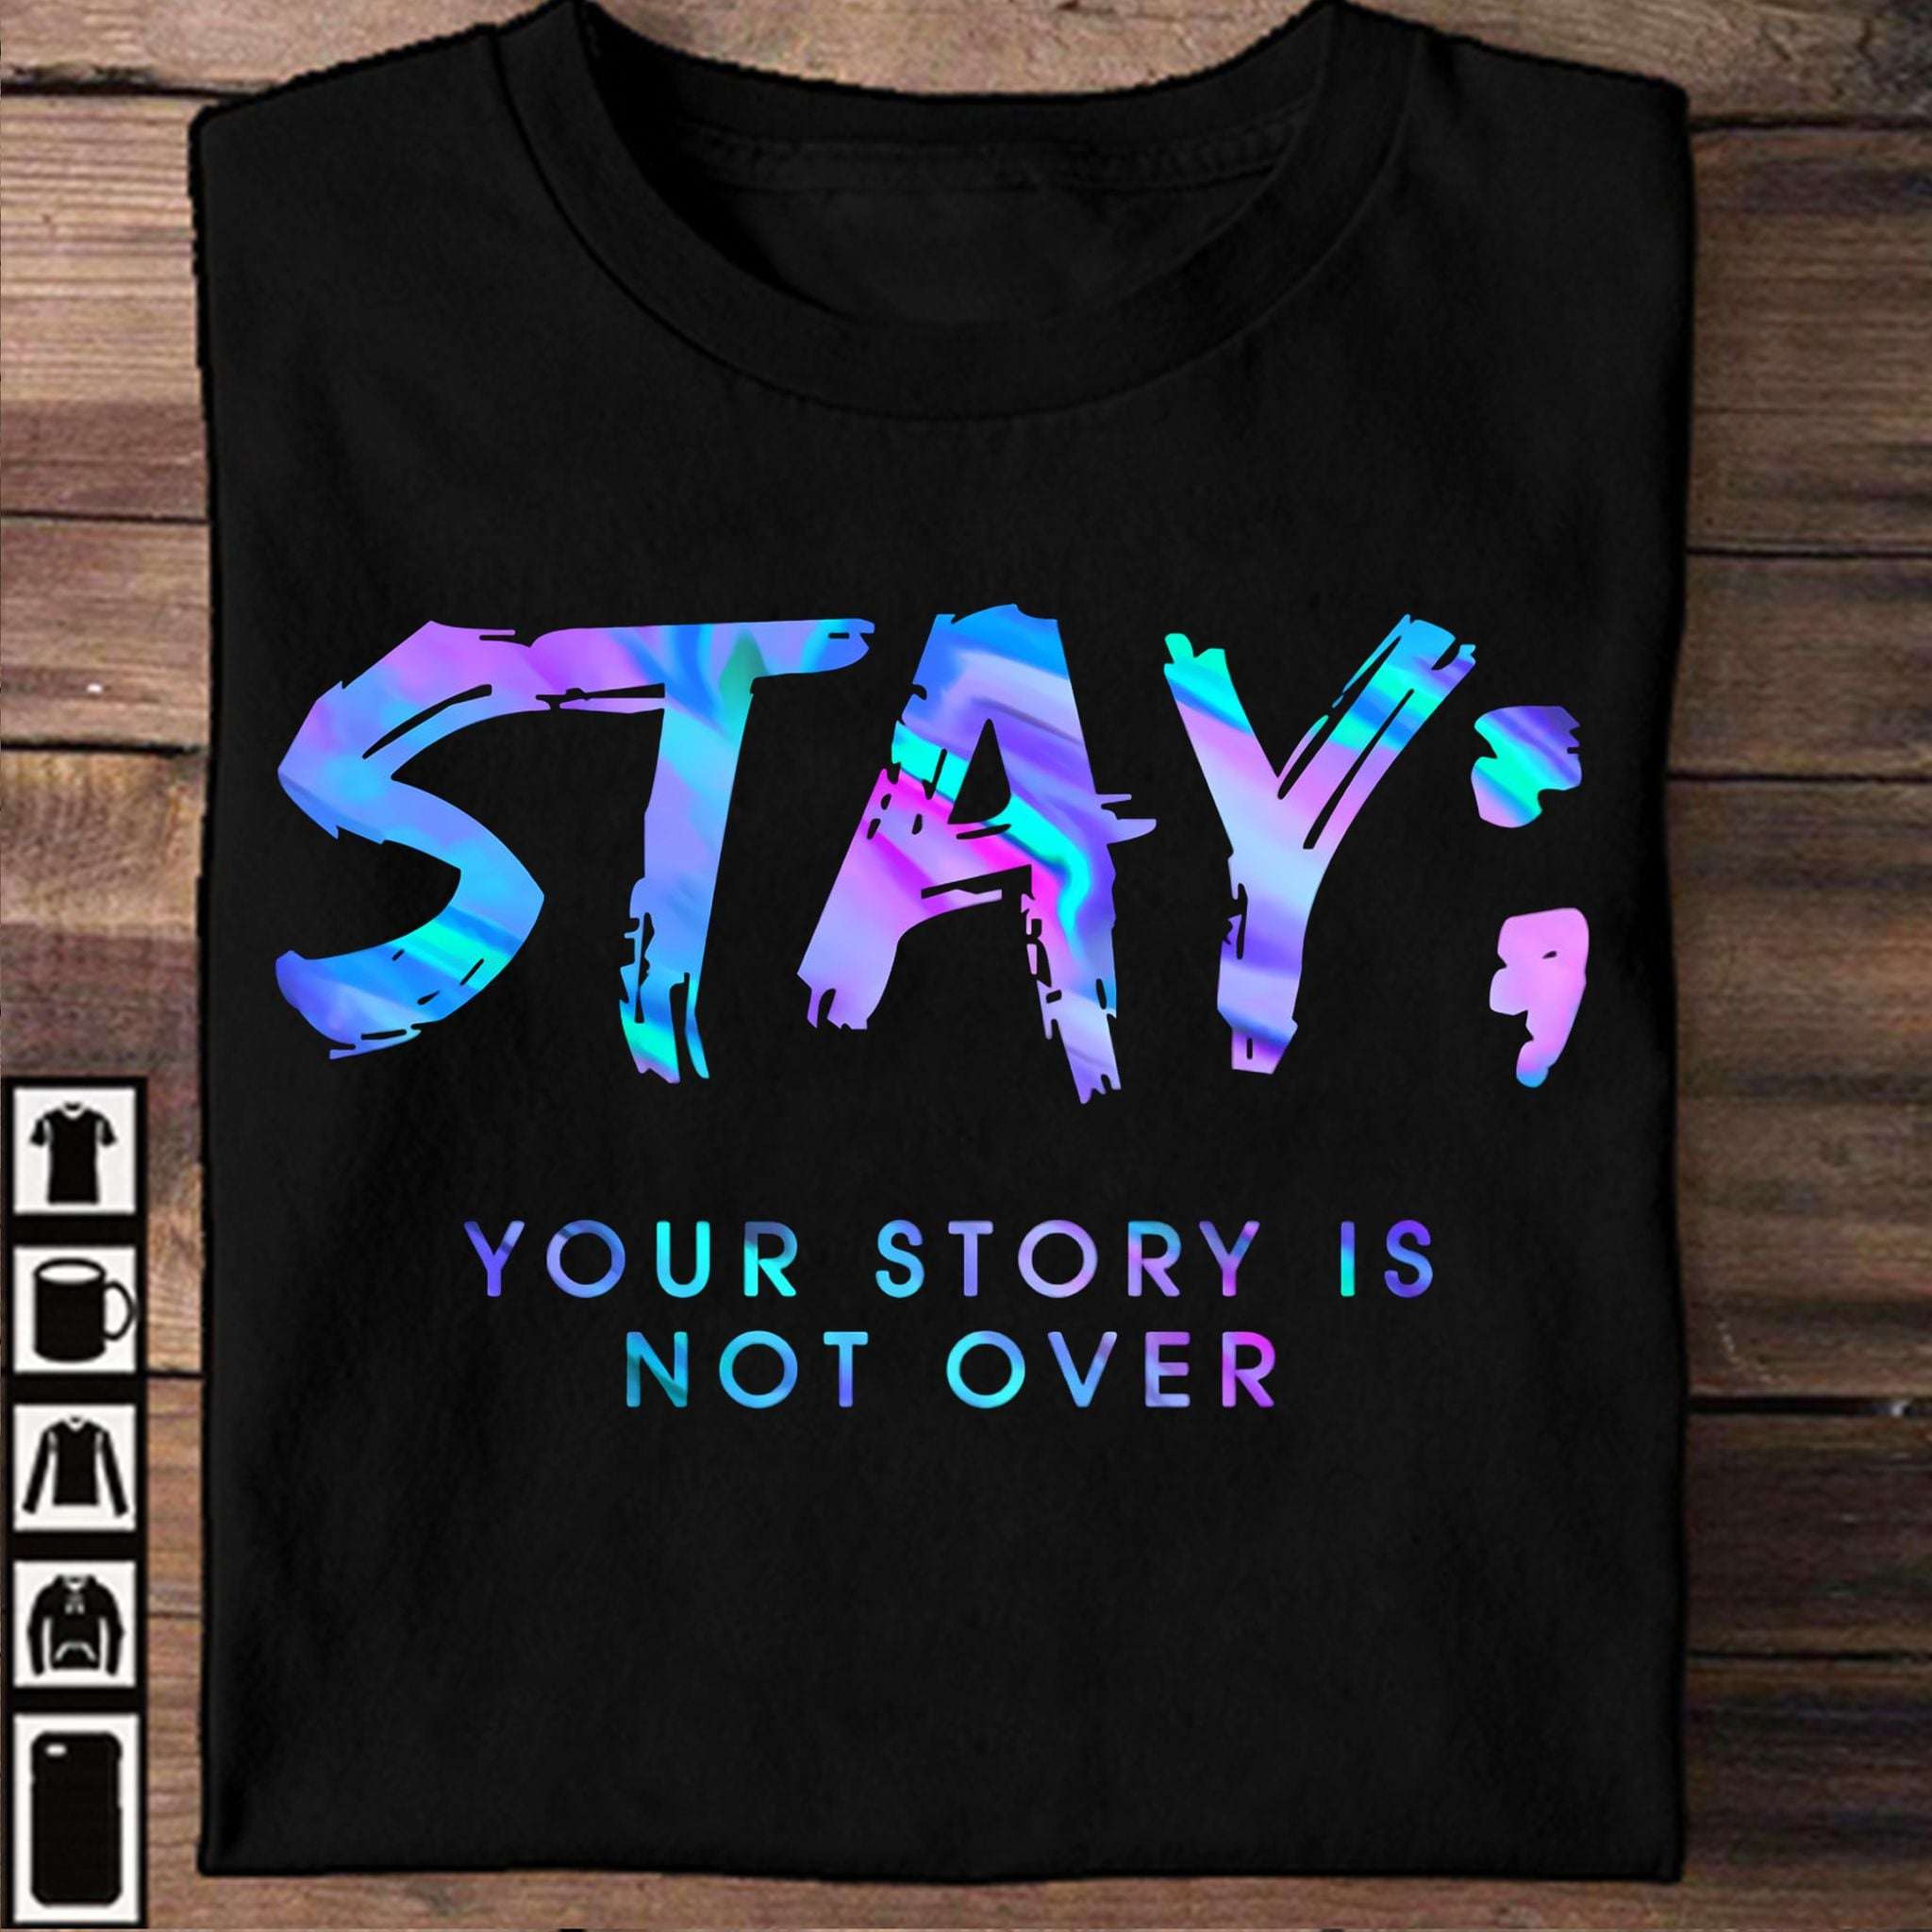 Stay your story is not over - Suicide prevetion awareness, your life matters